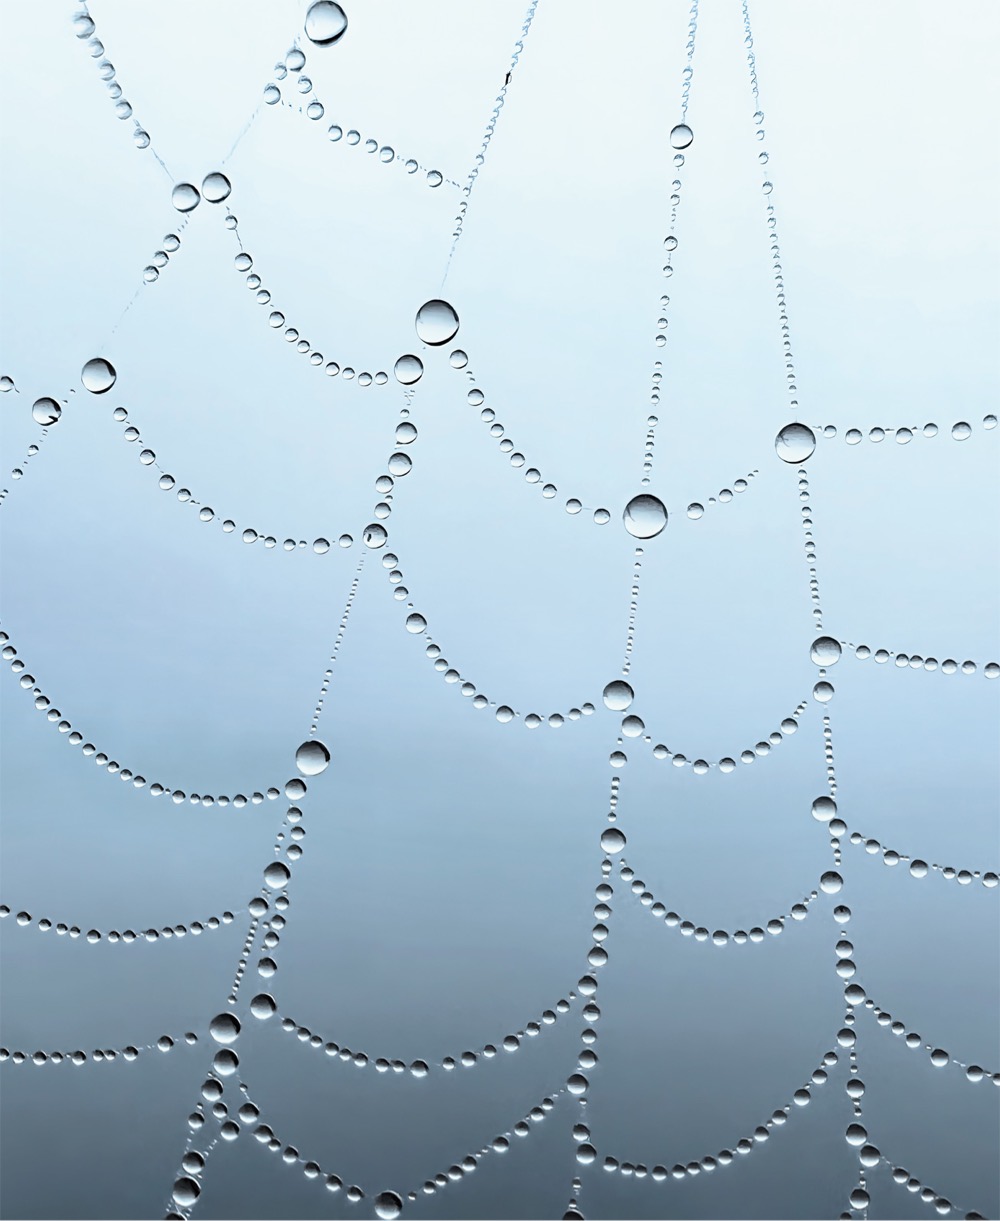 dewdrops on a delicate spider web